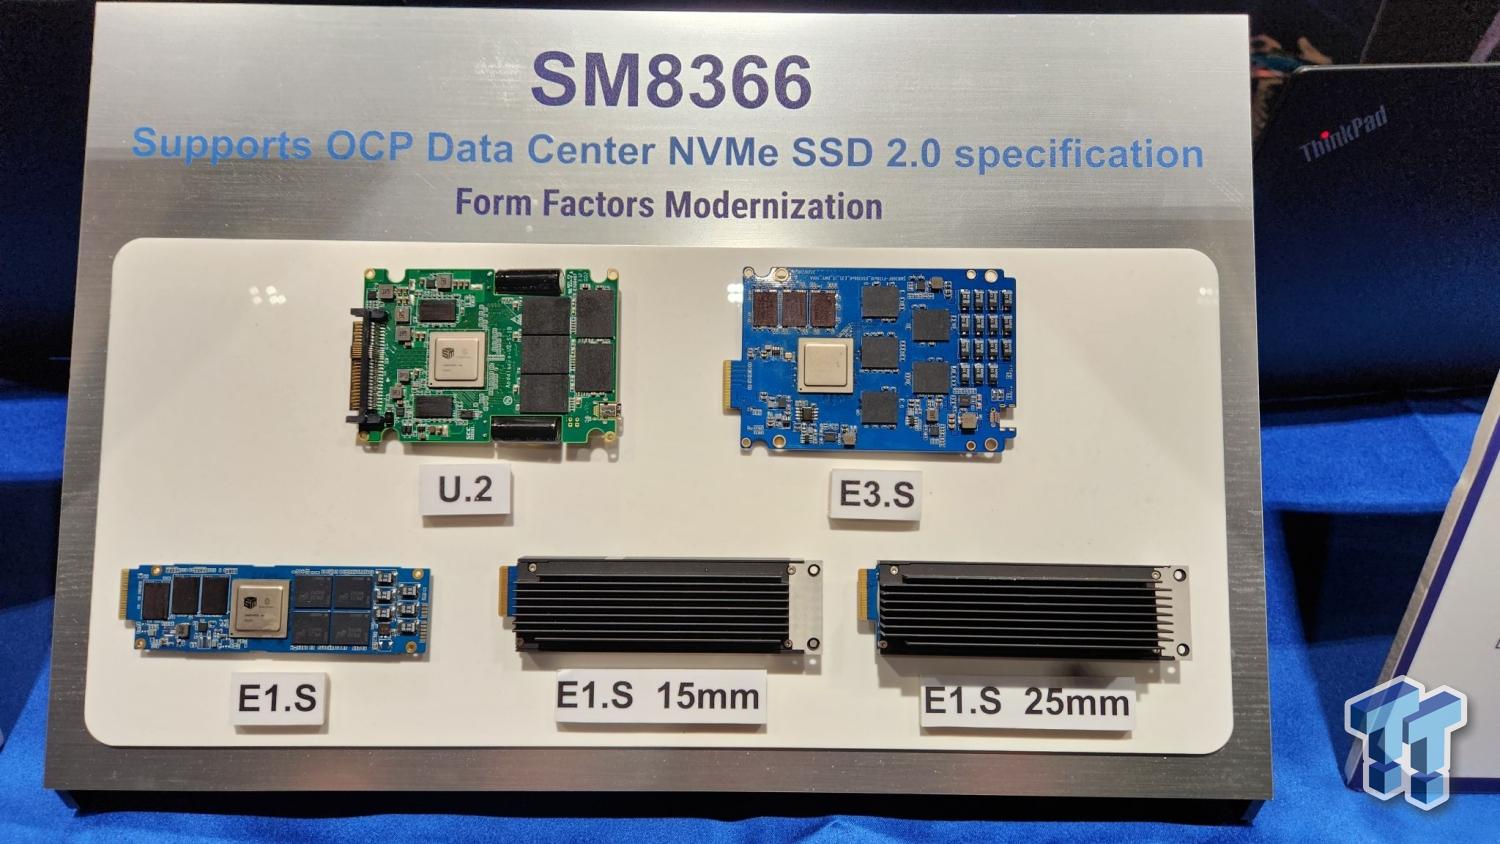 TweakTown Enlarged Image - The new Silicon Motion SM8366 SSD controller in multiple different form factors